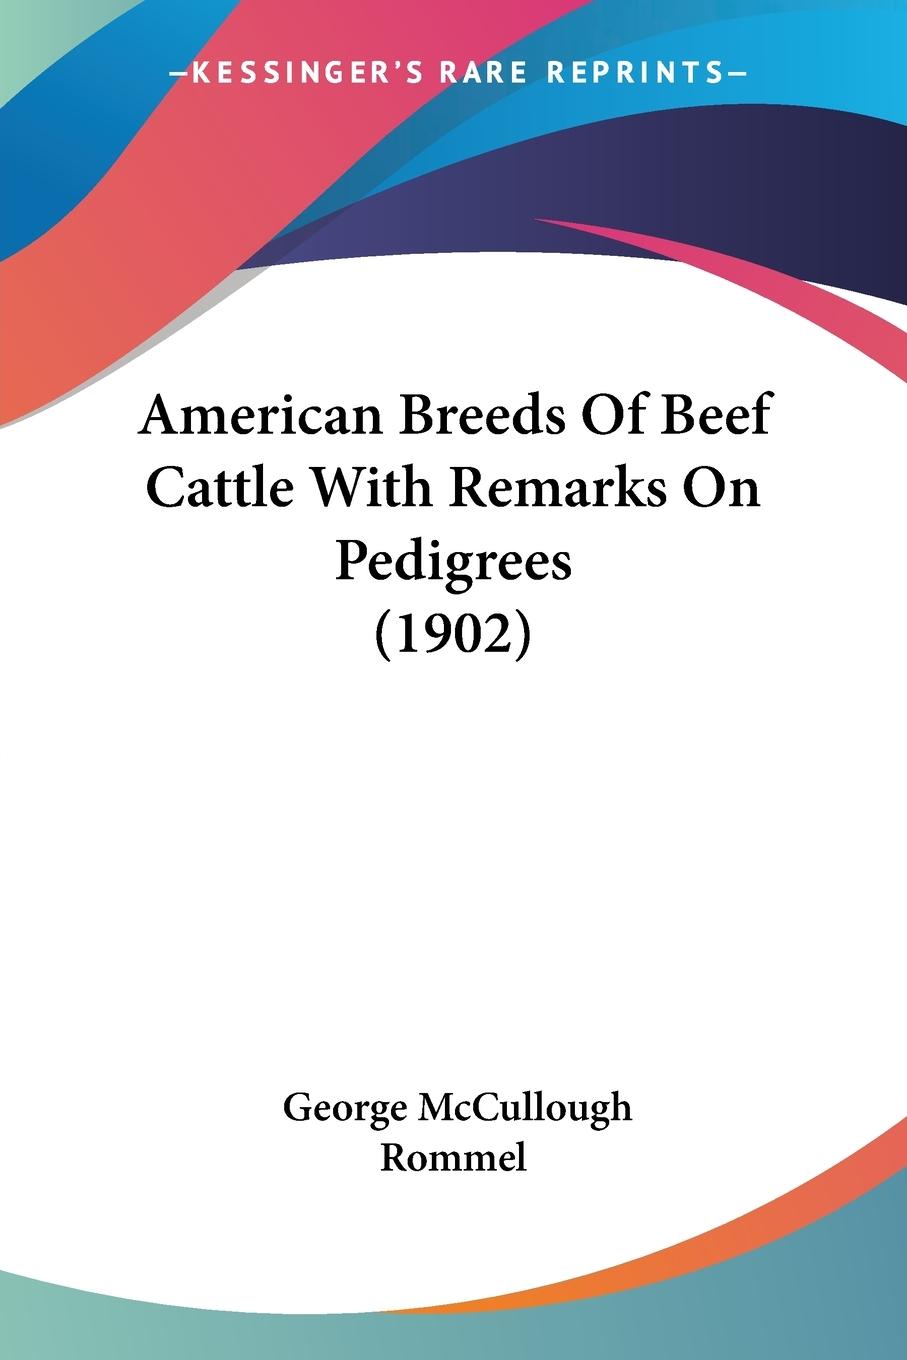 American Breeds Of Beef Cattle With Remarks On Pedigrees (1902) - Rommel, George Mccullough